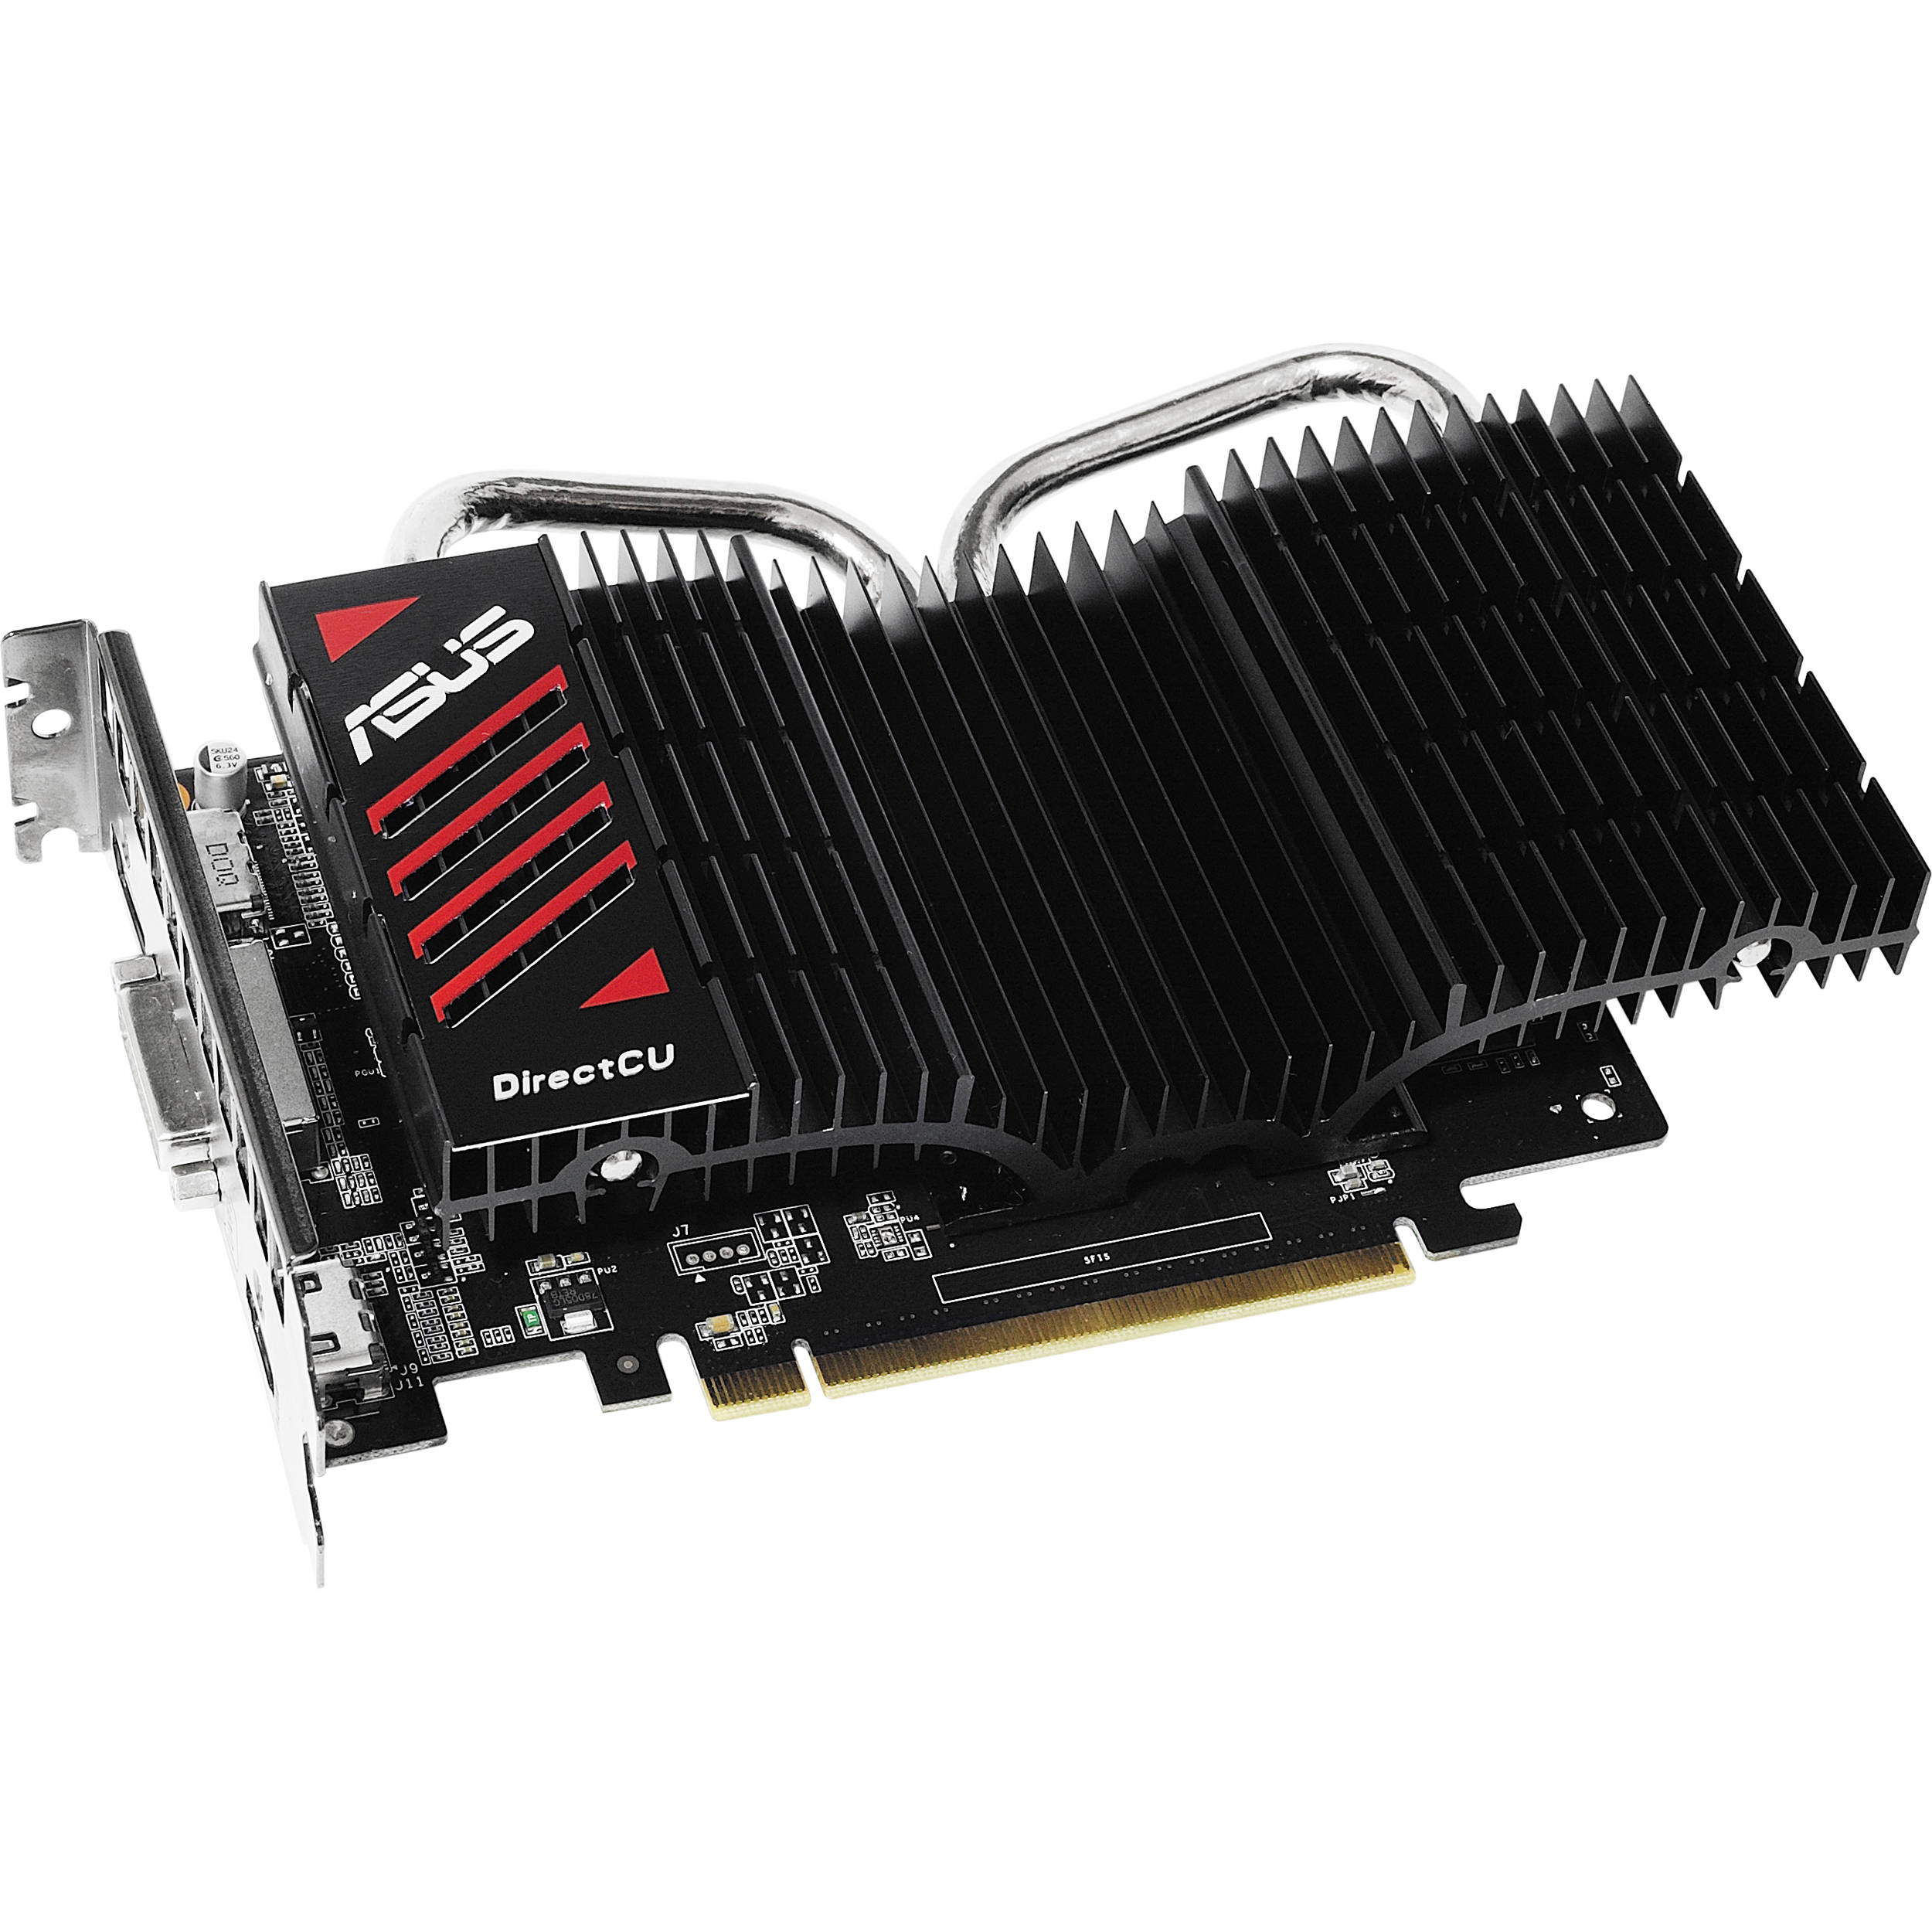 Asus Geforce Gtx 750 Graphics Card With Directcu